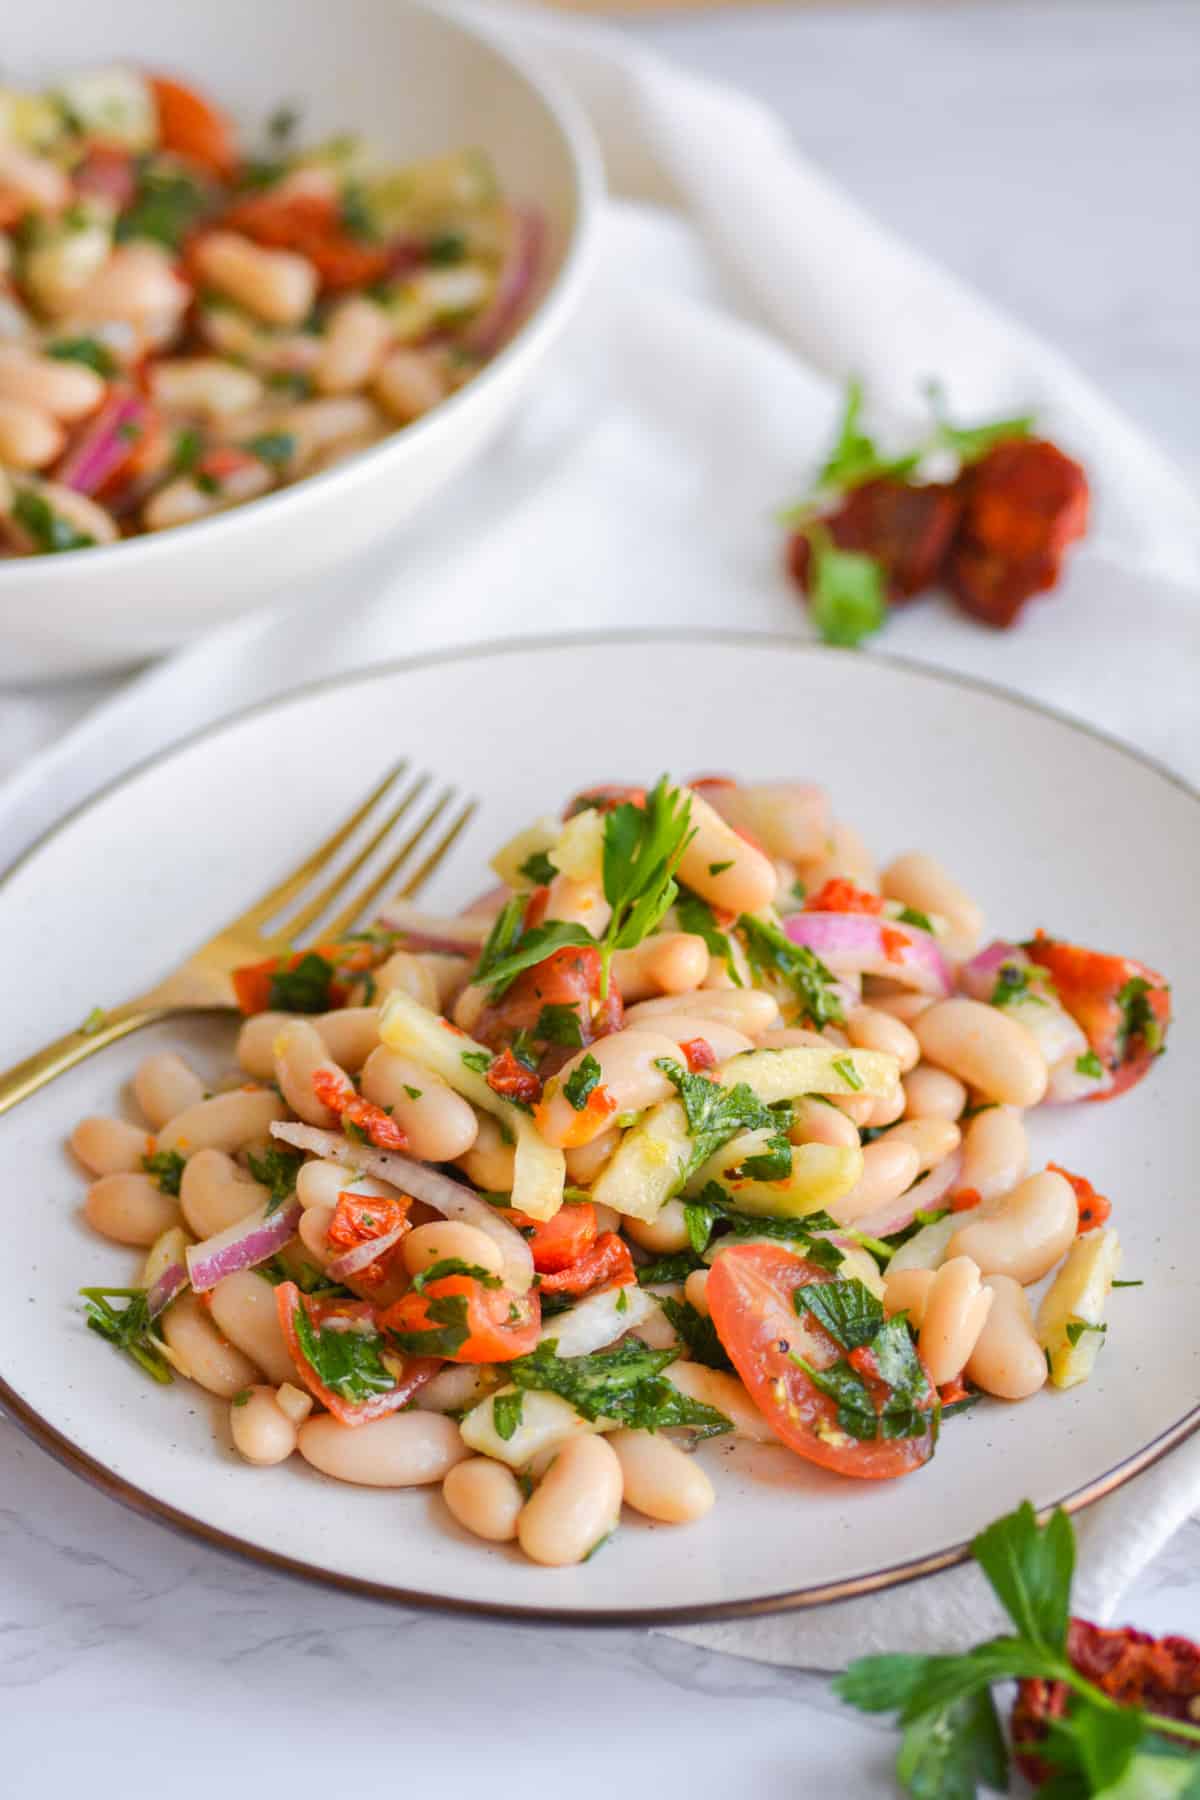 A plate with Italian white bean salad on it